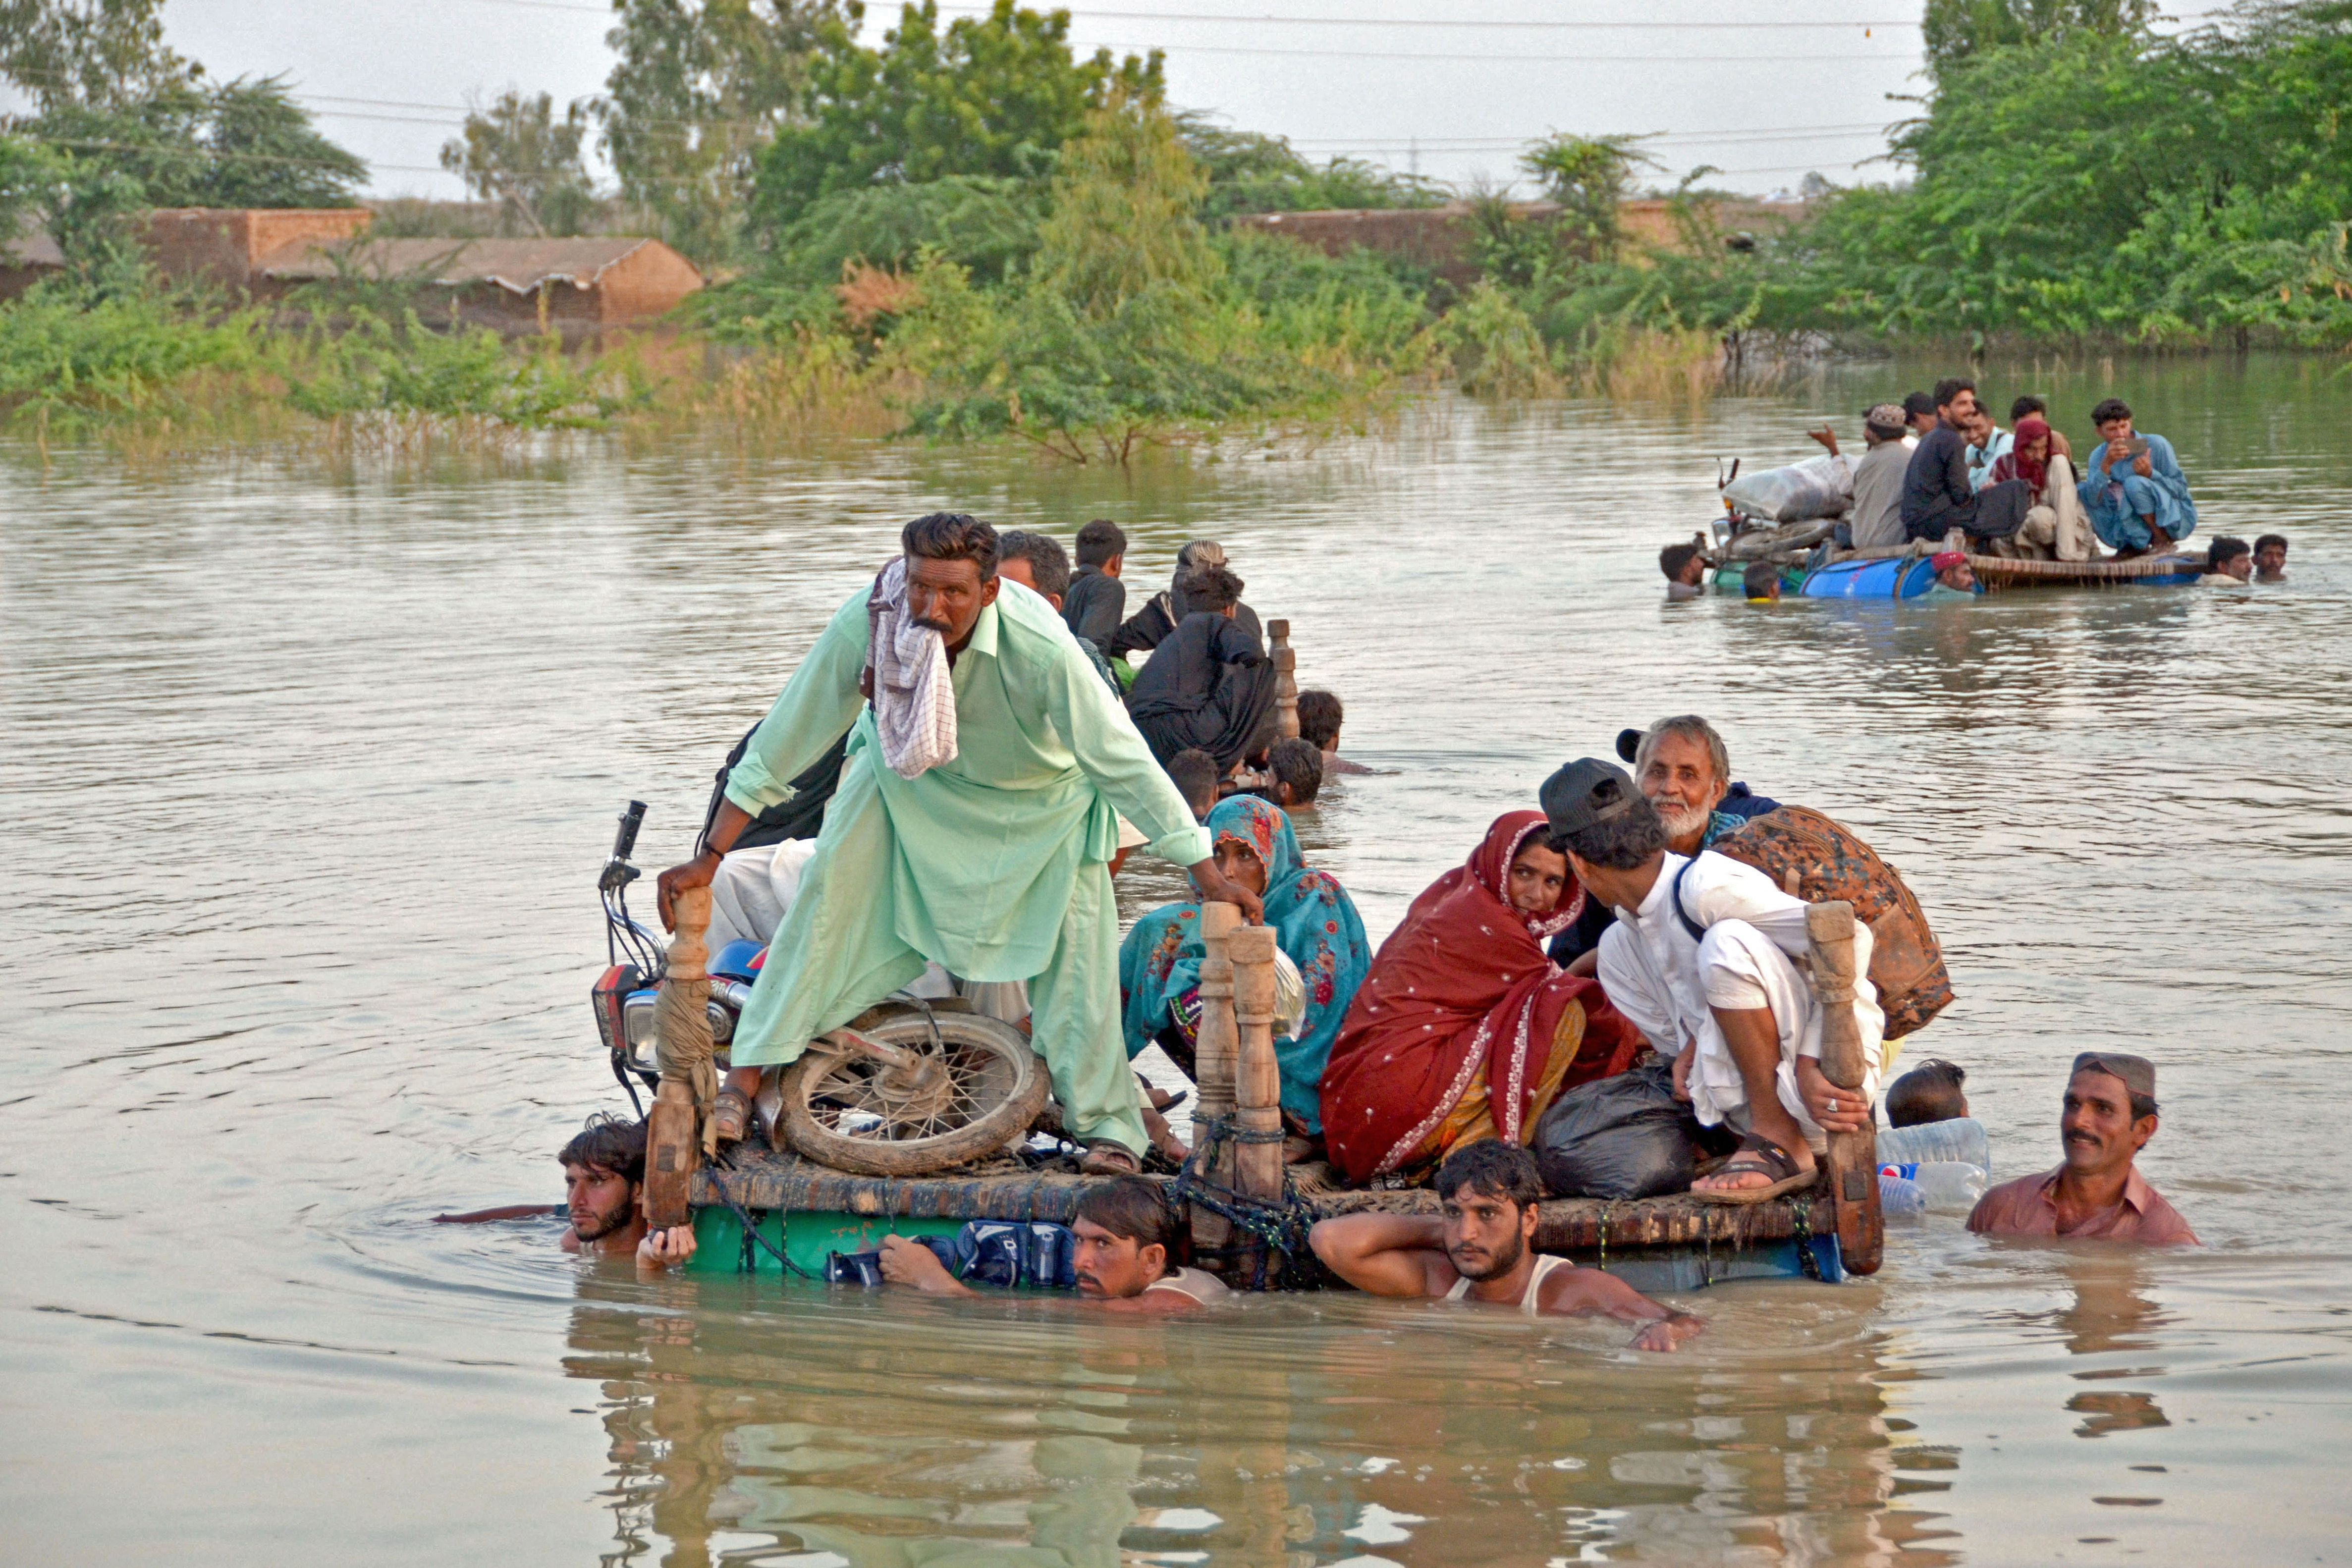 People wade through floodwaters in the Jaffarabad district of Balochistan province